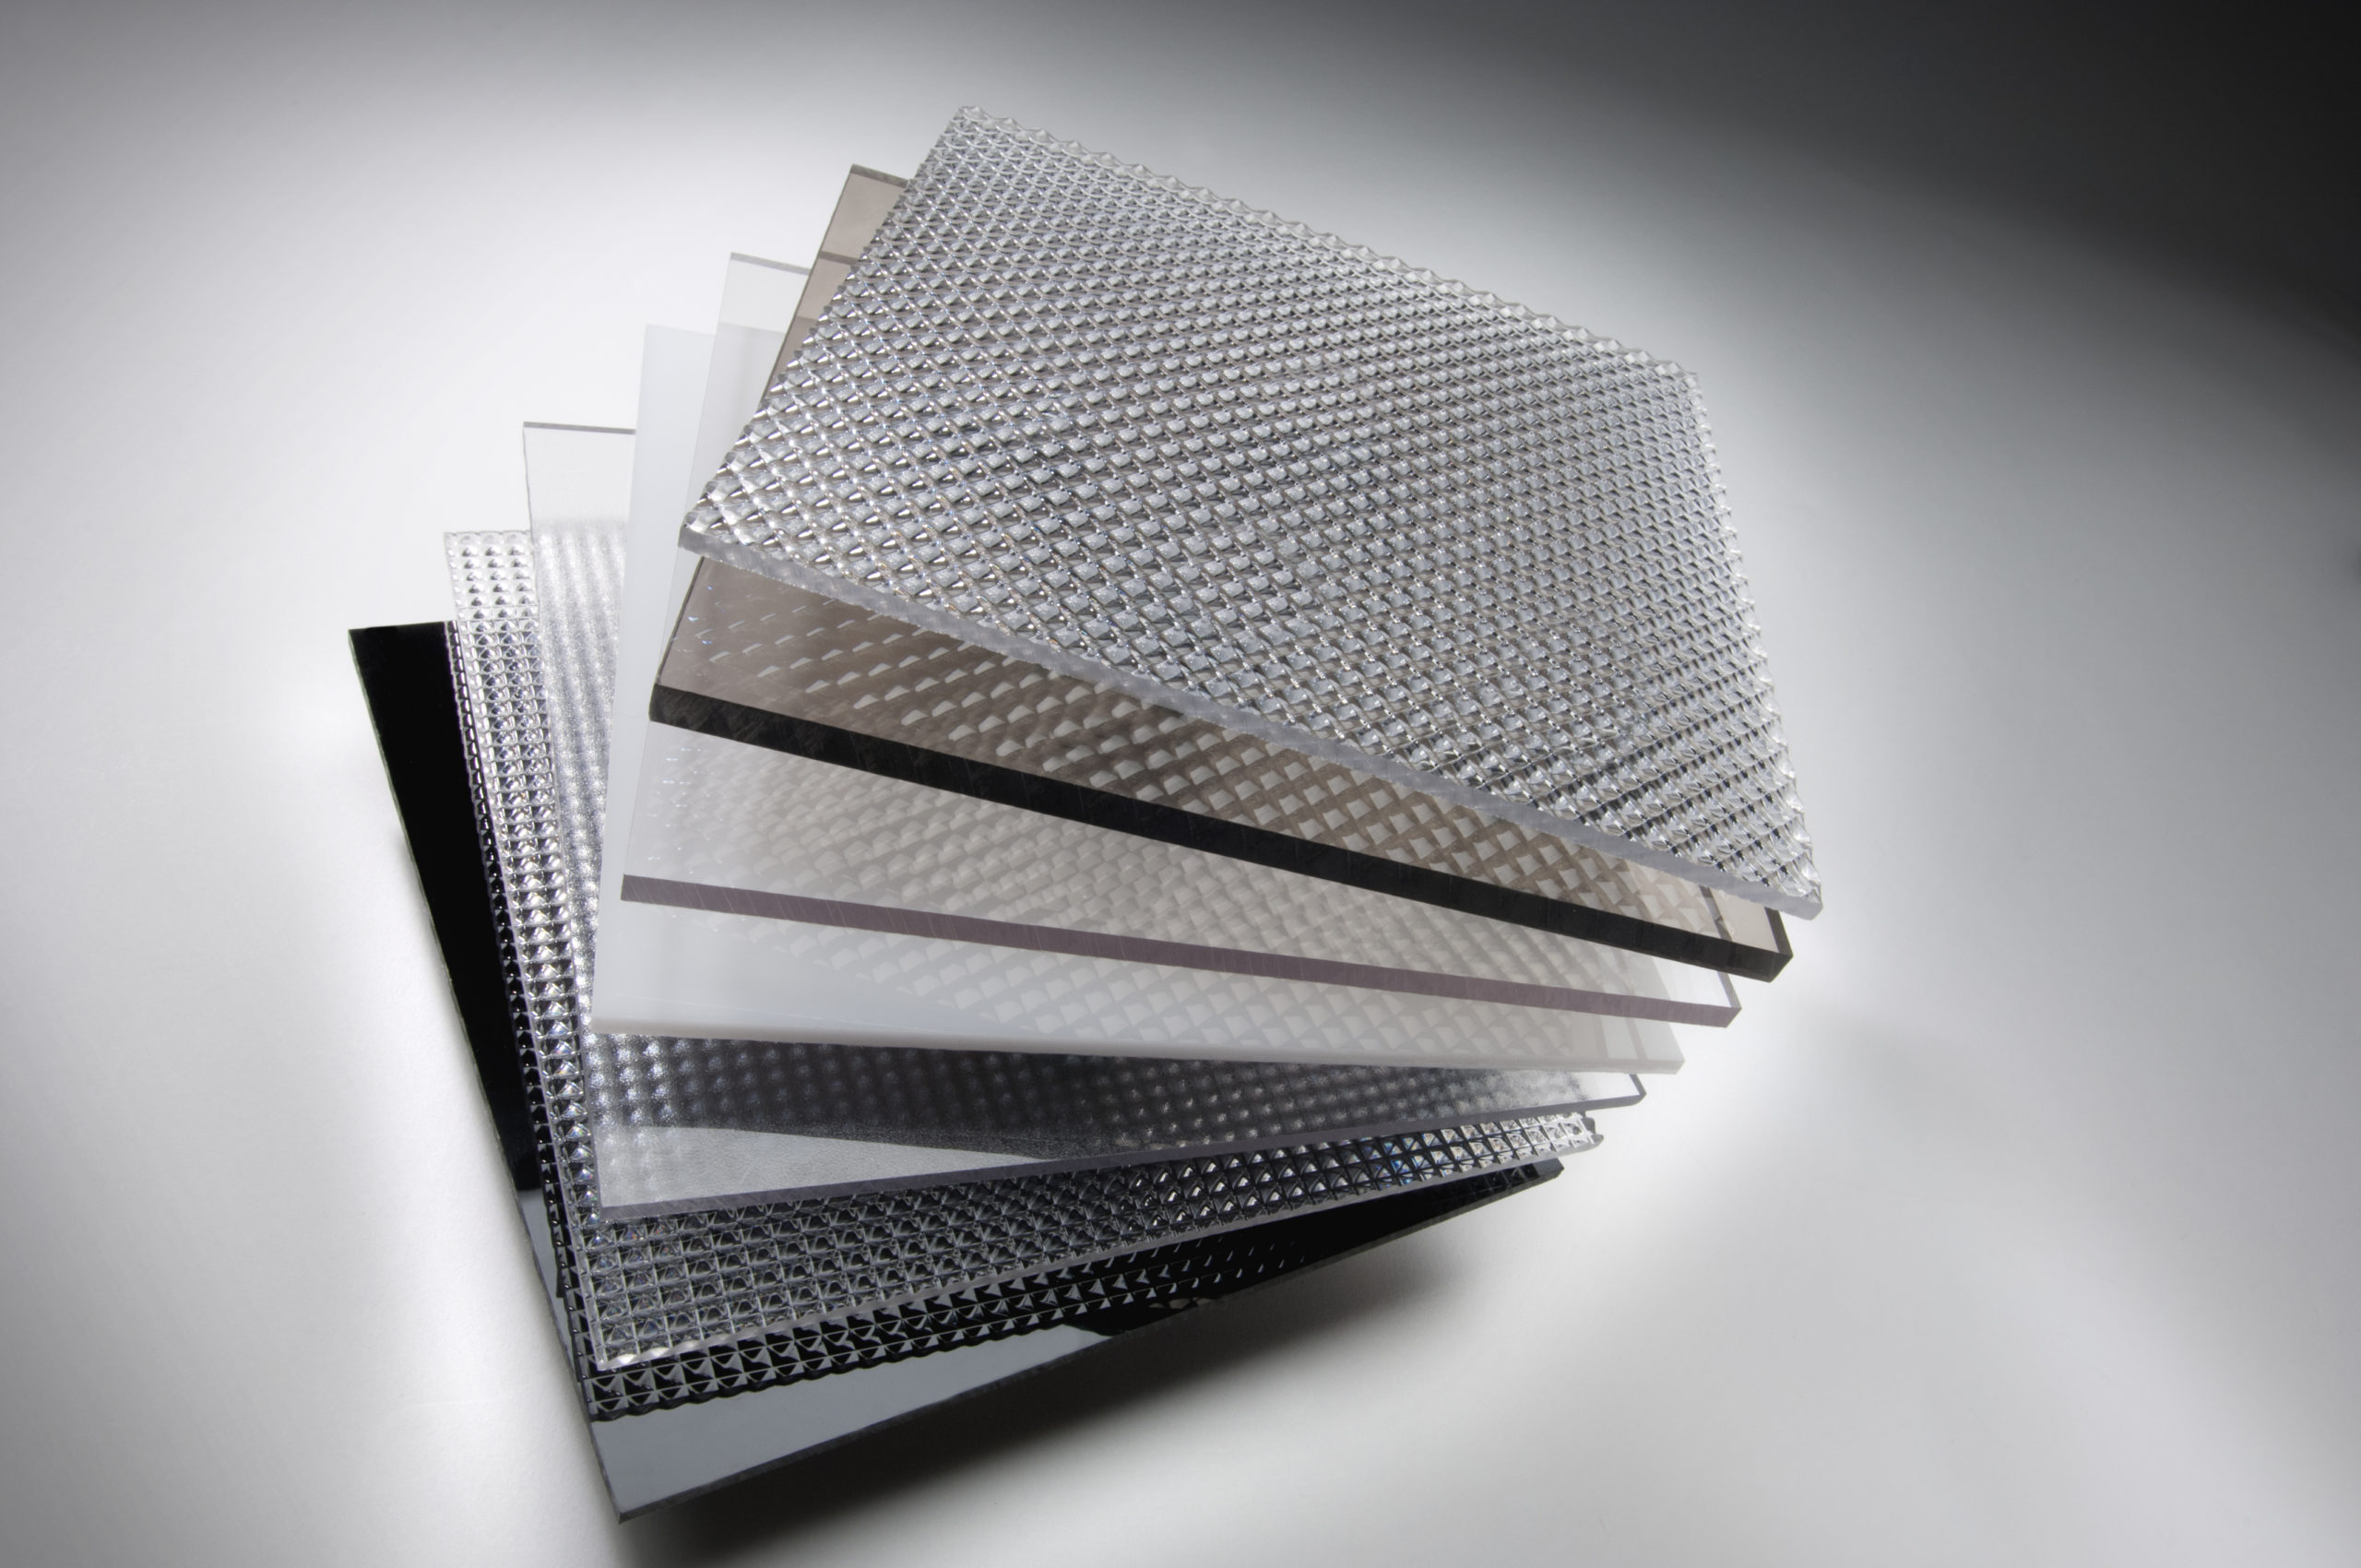 Polycarbonate Sheets / LEXAN Sheets - Polymershapes